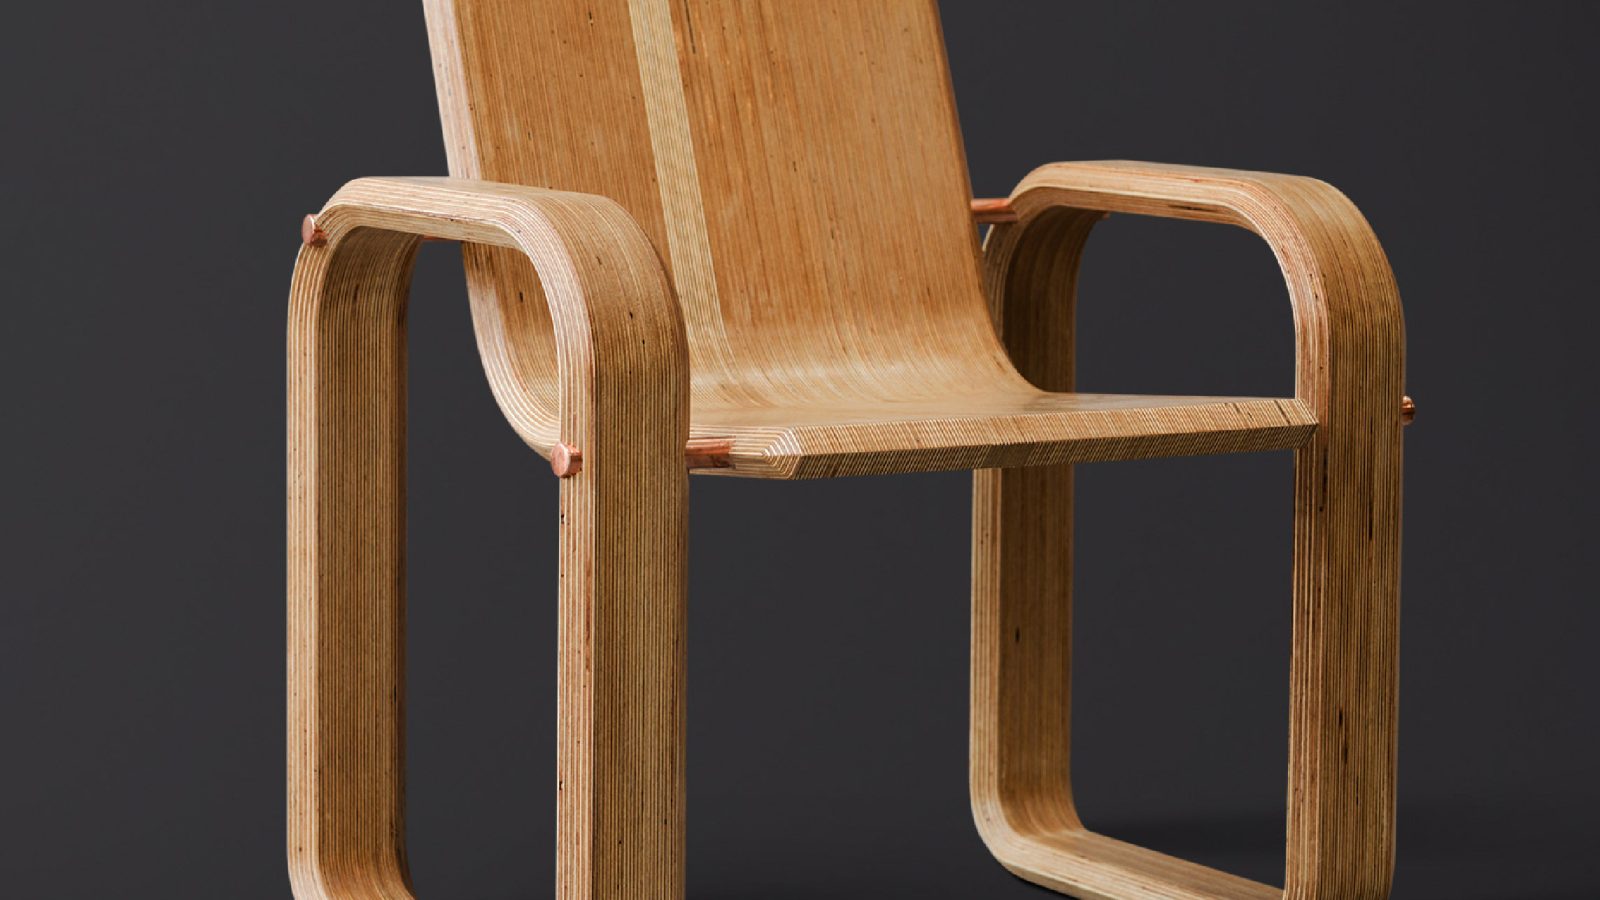 A modern wooden chair with a streamlined design, featuring smooth curves and a continuous piece for the arms and legs against a dark background, meticulously crafted by a leading Design Agency UK.